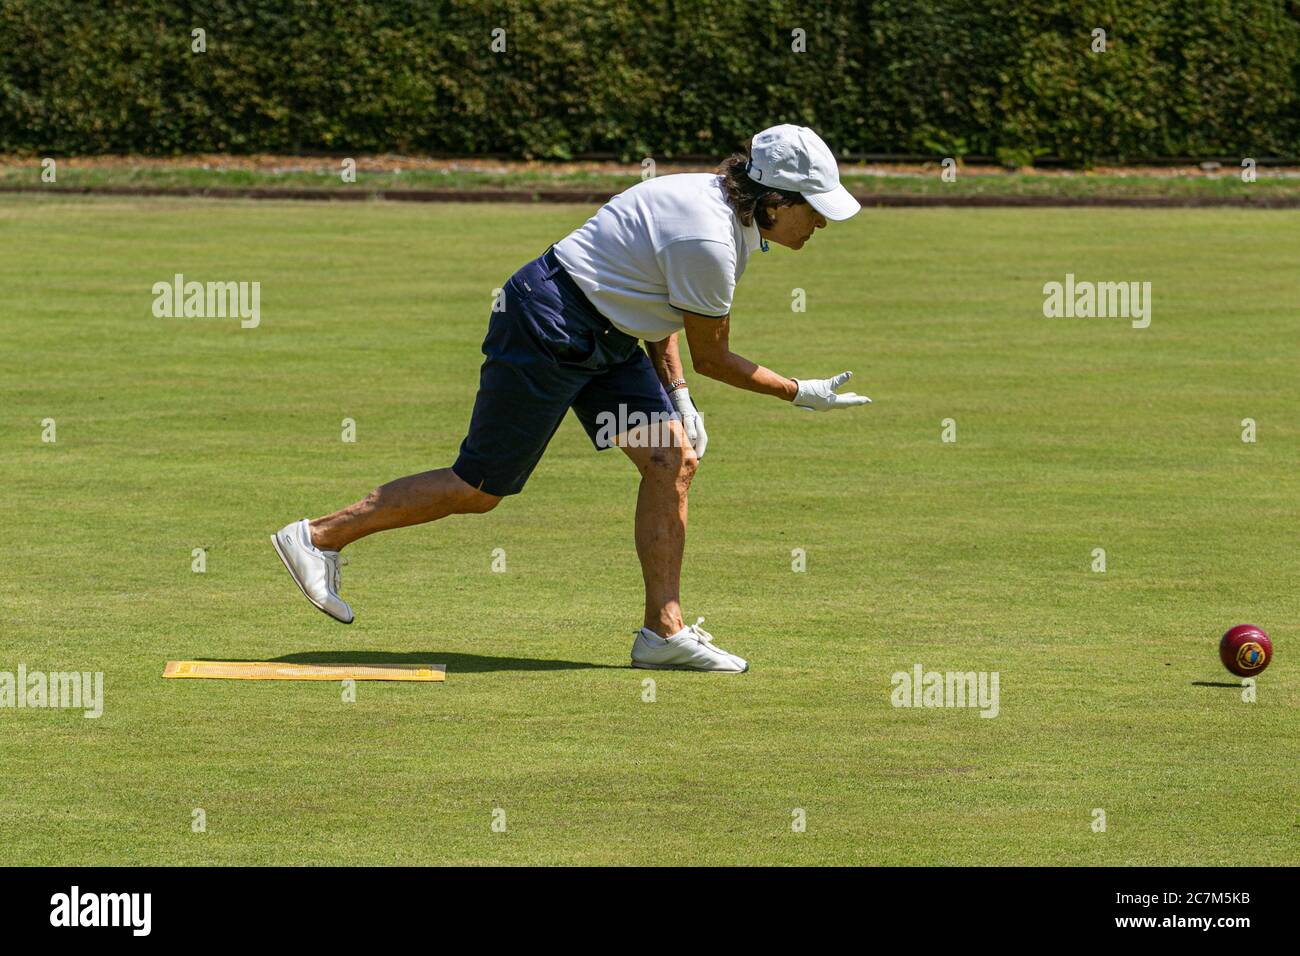 WIMBLEDON LONDON UK. 18th July, 2020. Lawn bowlers from the Wimbledon Park Bowls Club enjoy bowling outdoors on a hot summer day as lockdown restrictions are lifted and sport facilities reopen.Credit: amer ghazzal/Alamy Live News Stock Photo